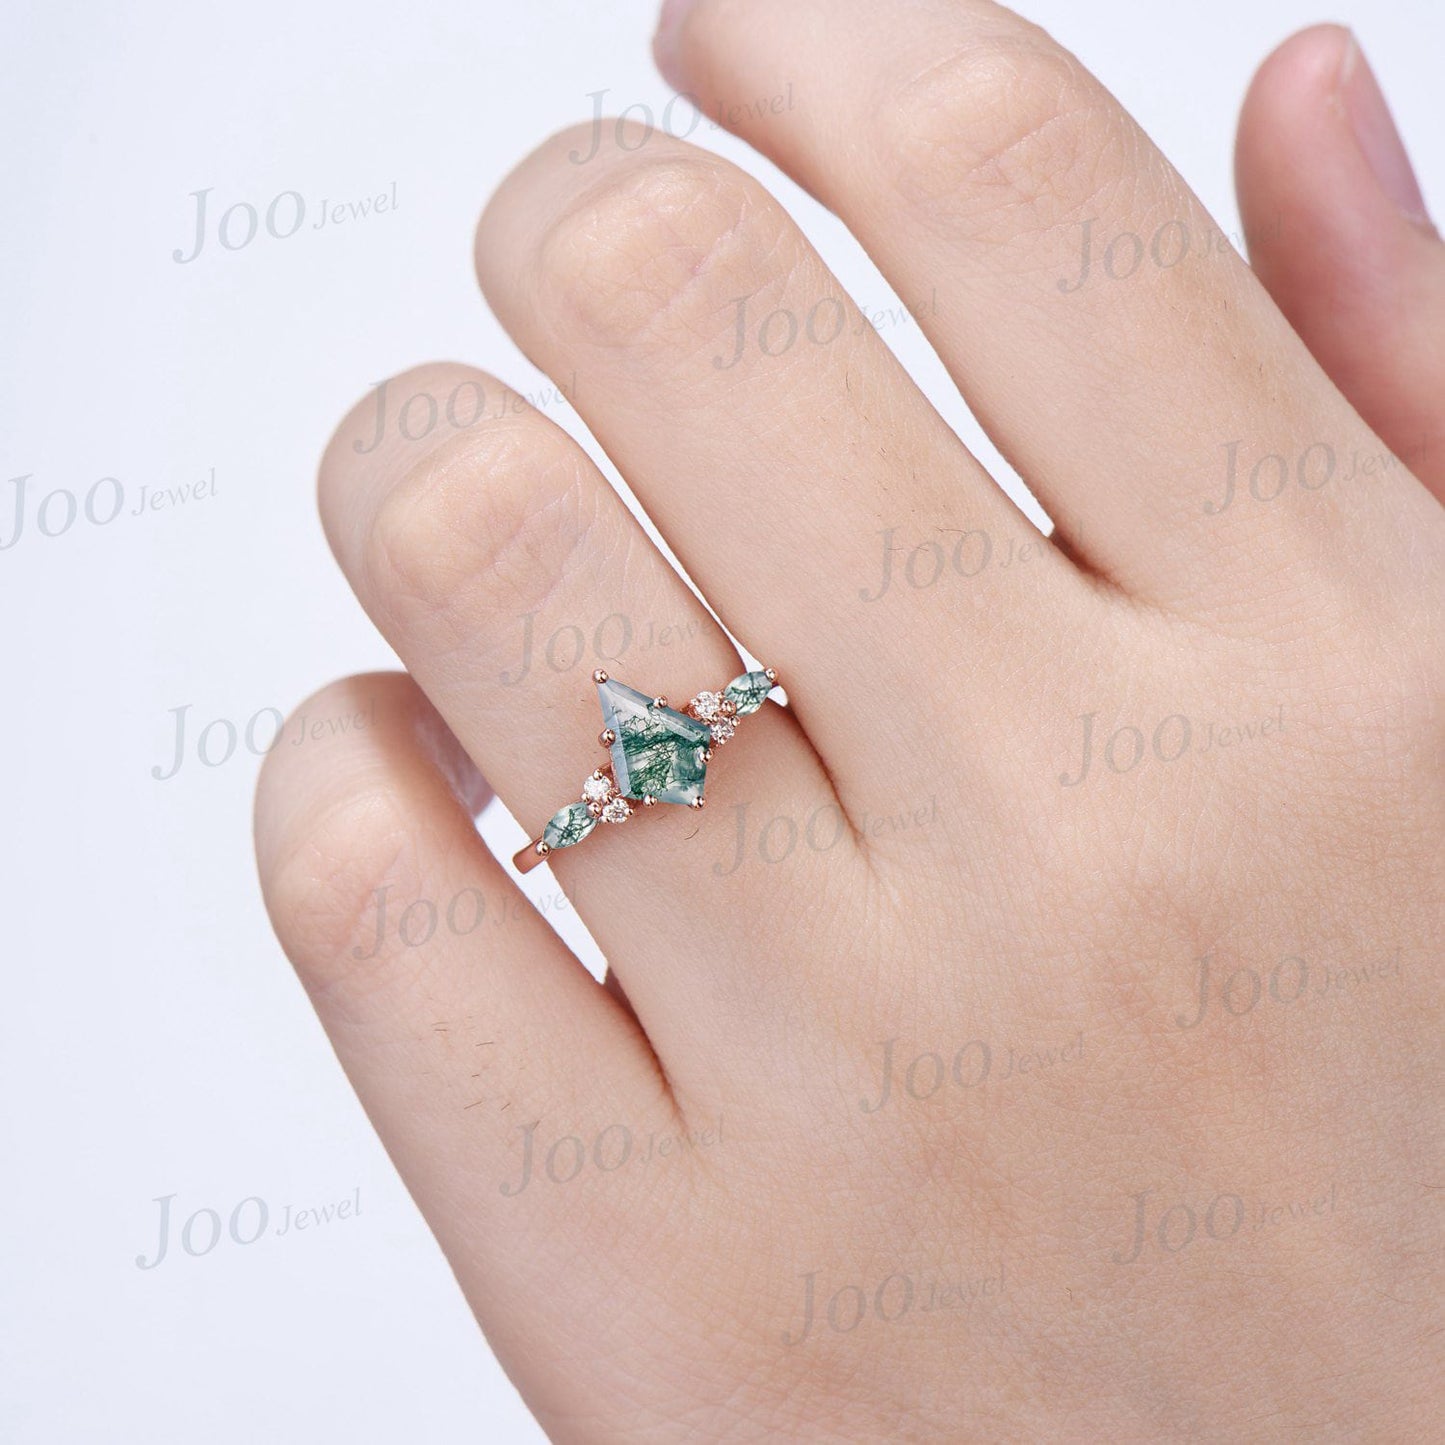 1ct Kite Cut Green Moss Agate Engagement Rings 6 Prong Cluster Aquatic Agate Promise Ring Unique Marquise Moss Agate Moissanite Wedding Ring